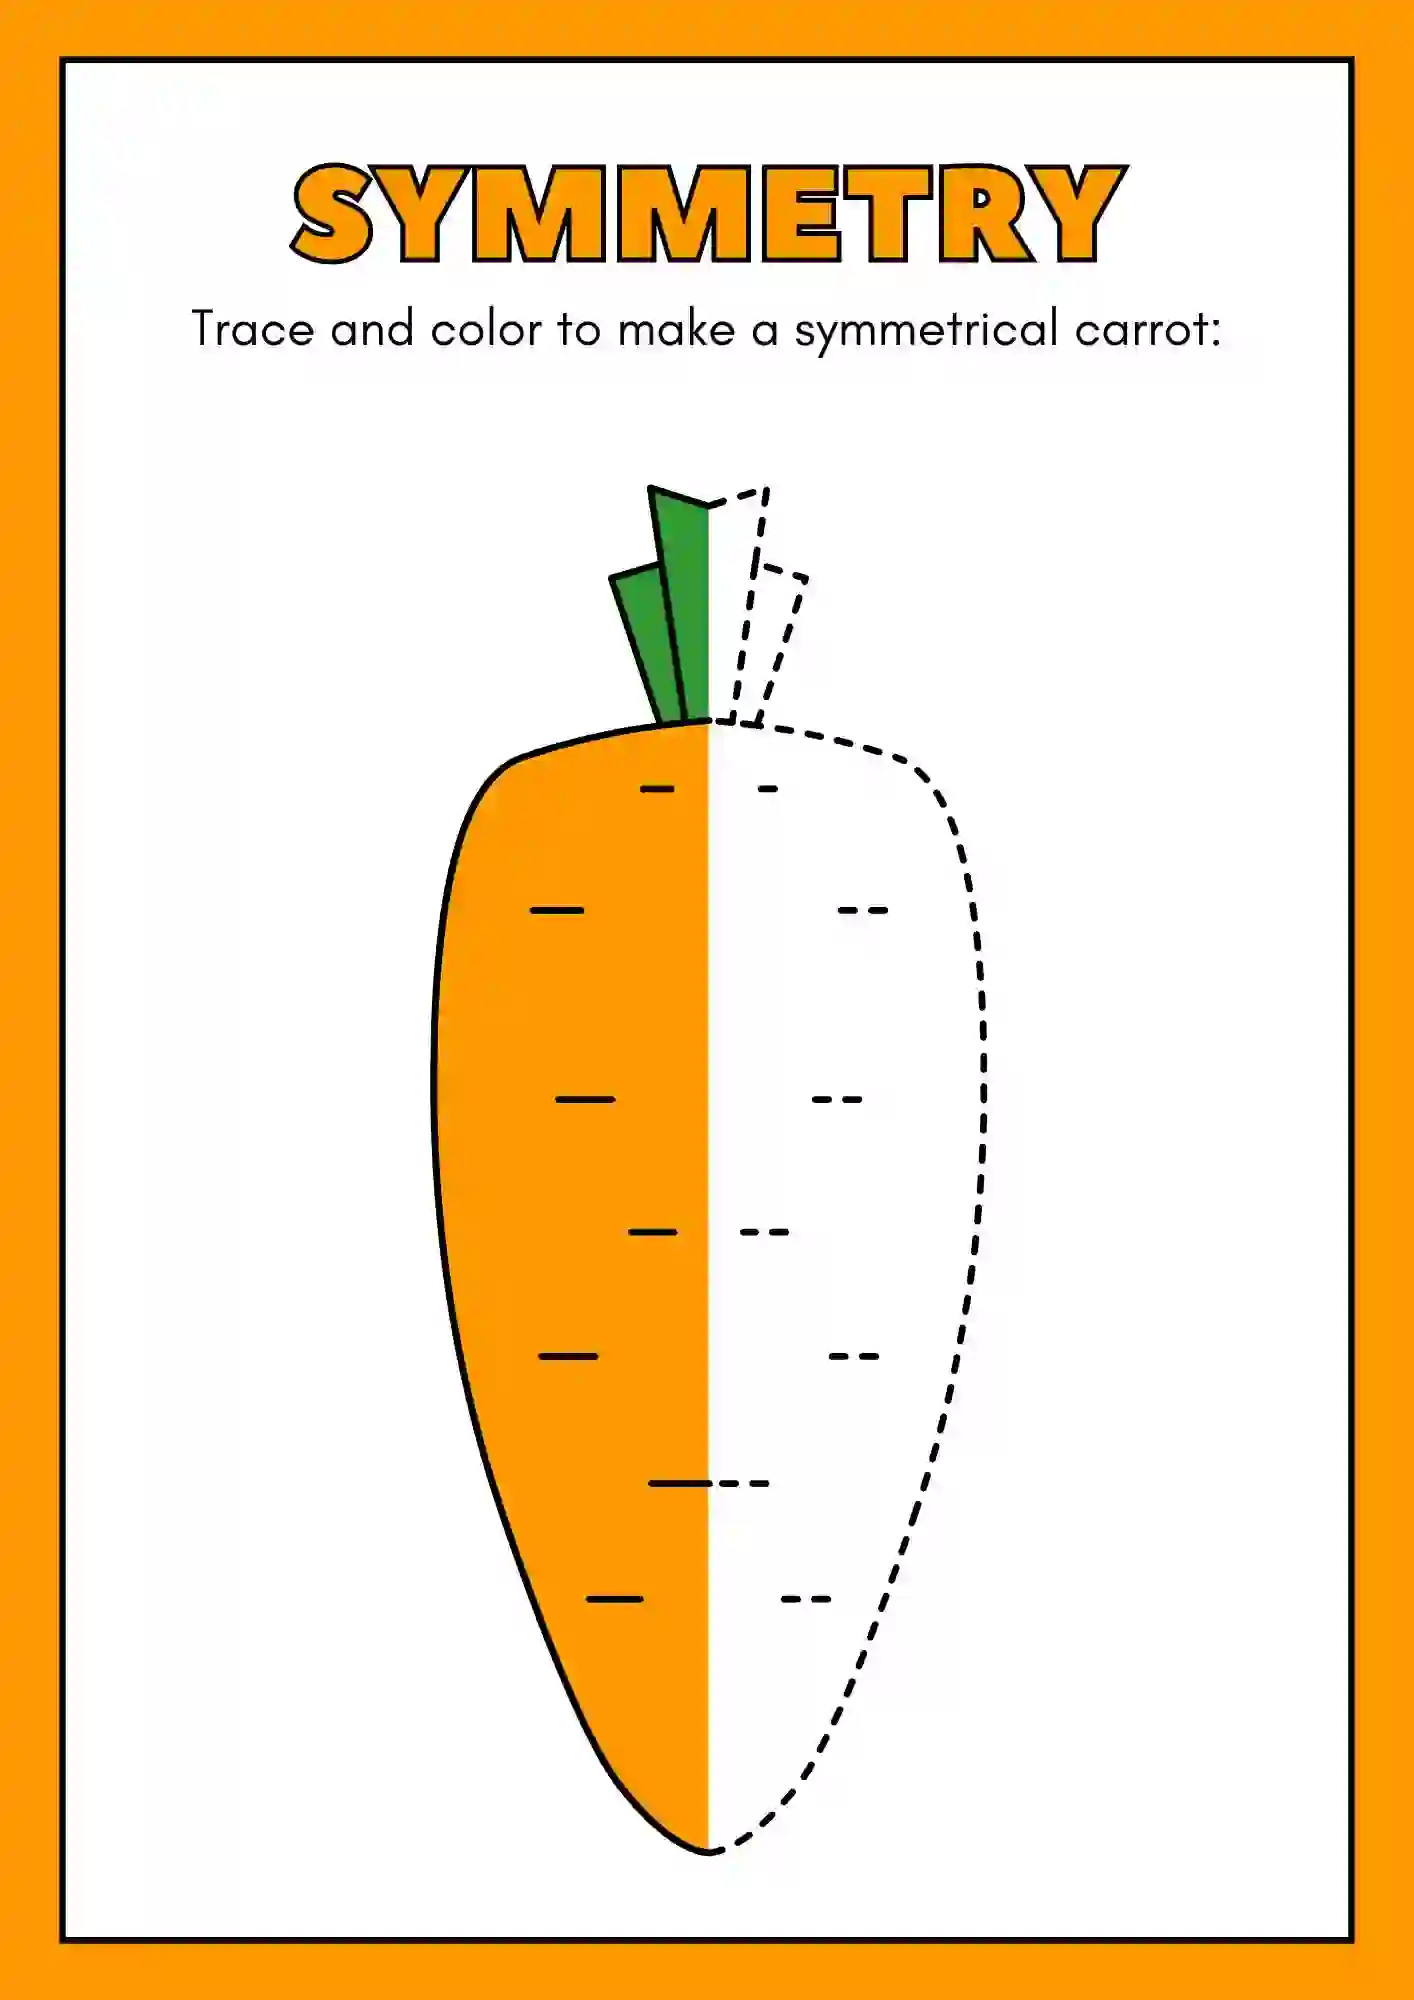 Symmetric Drawing and Coloring worksheets (carrot)